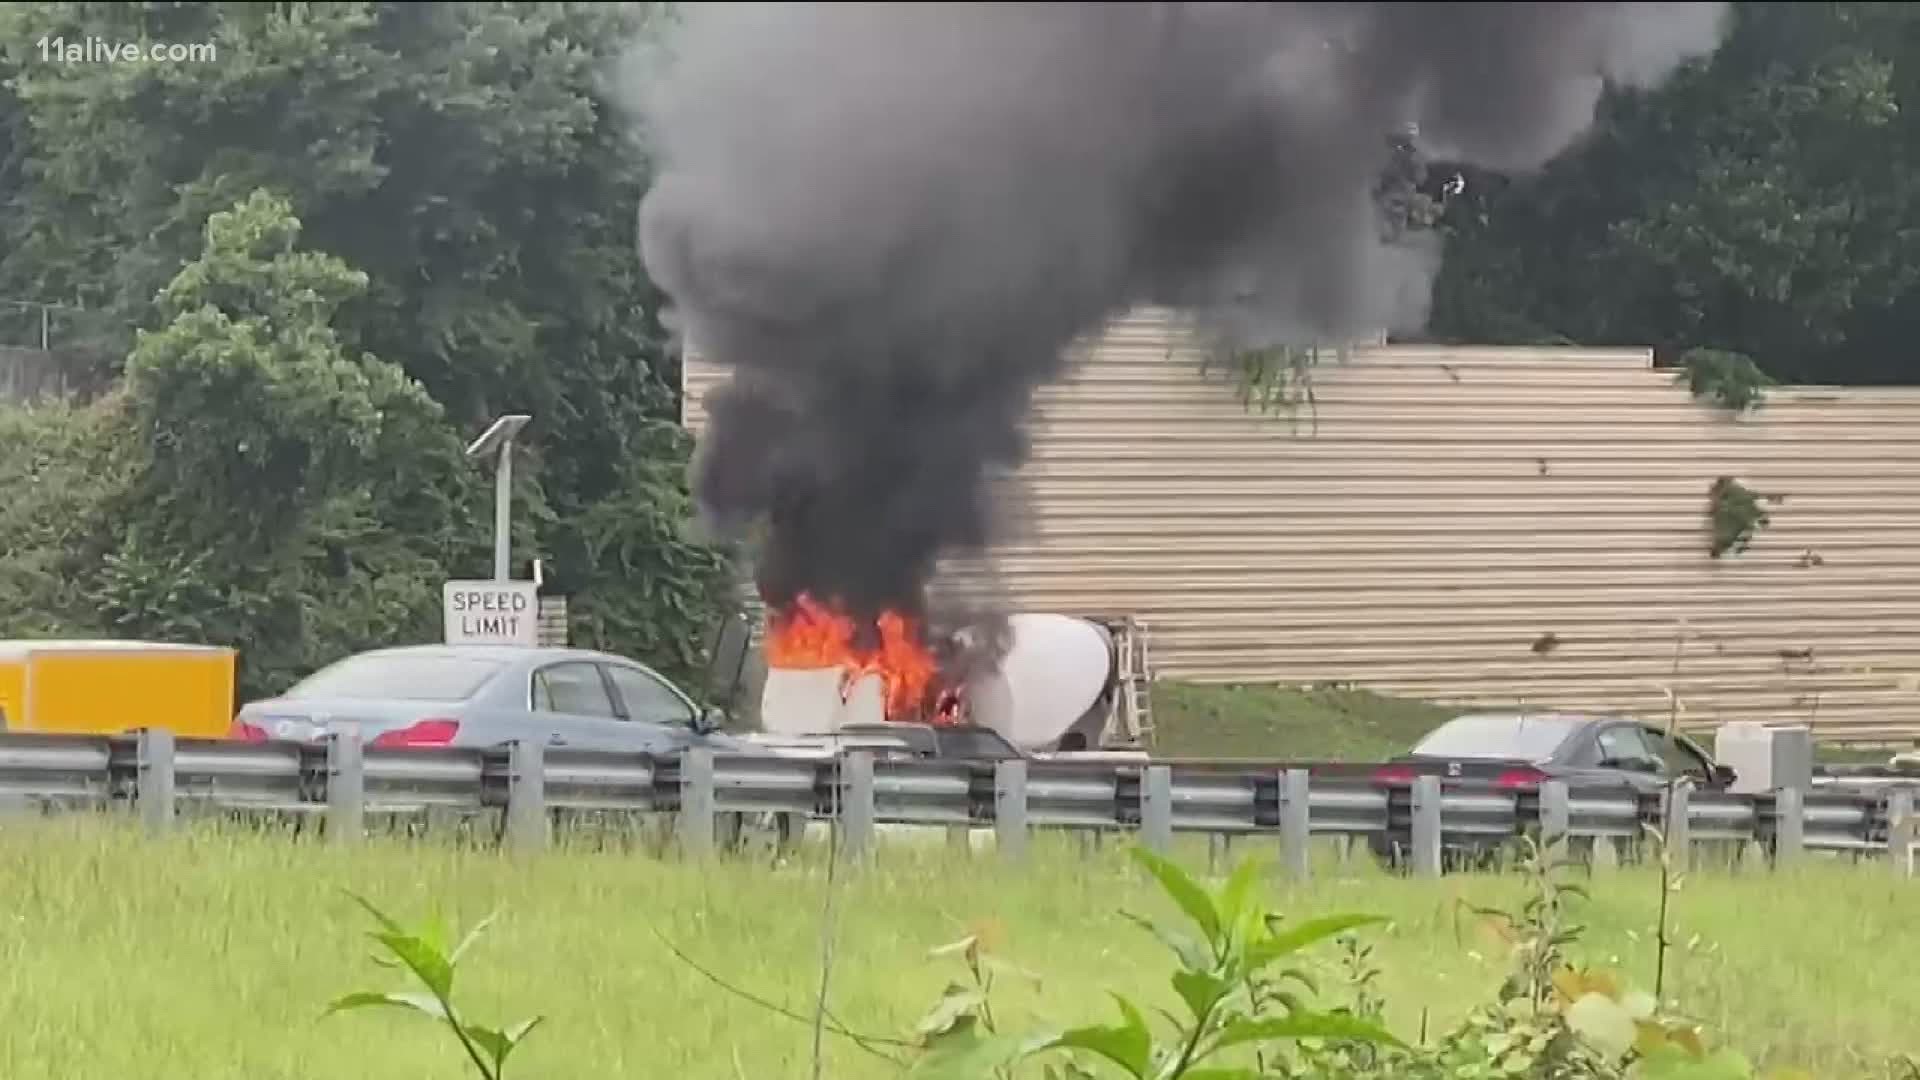 Video shows the truck in flames as other vehicles drive around. Heavy smoke also filled the air.